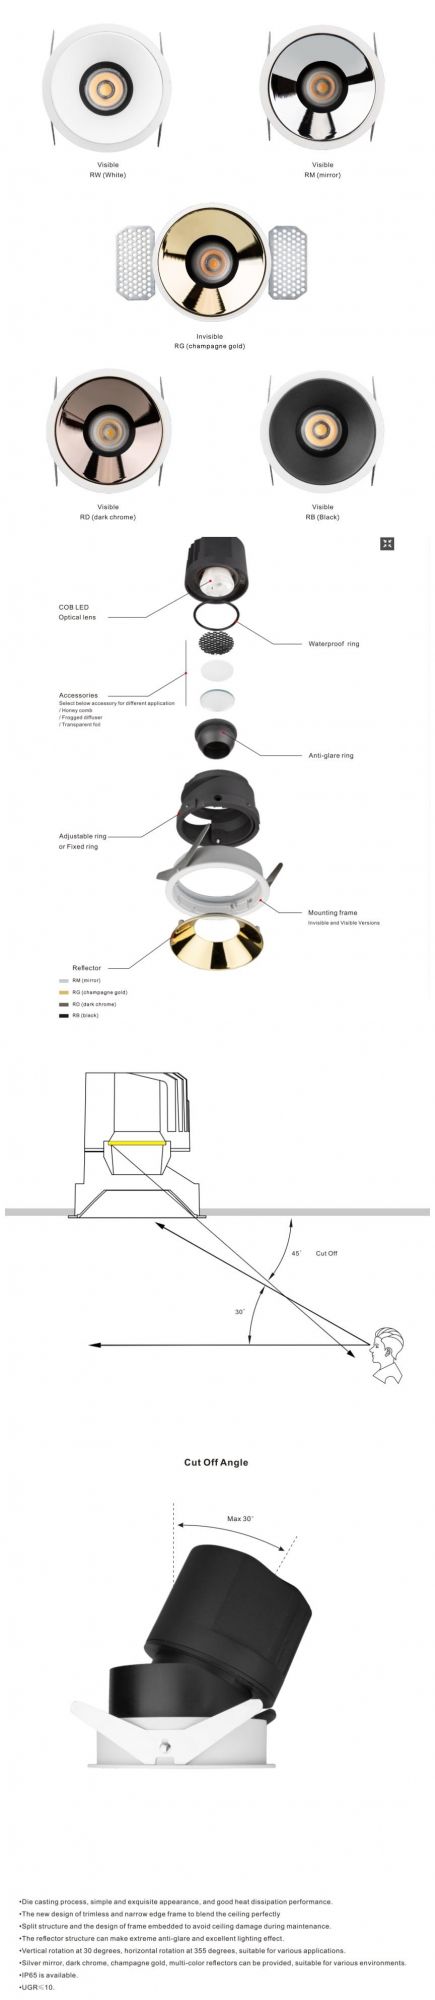 COB LED Ceiling Protect IP65 Invisible-Fixed Aluminum LED Downlight Trimless Down Light